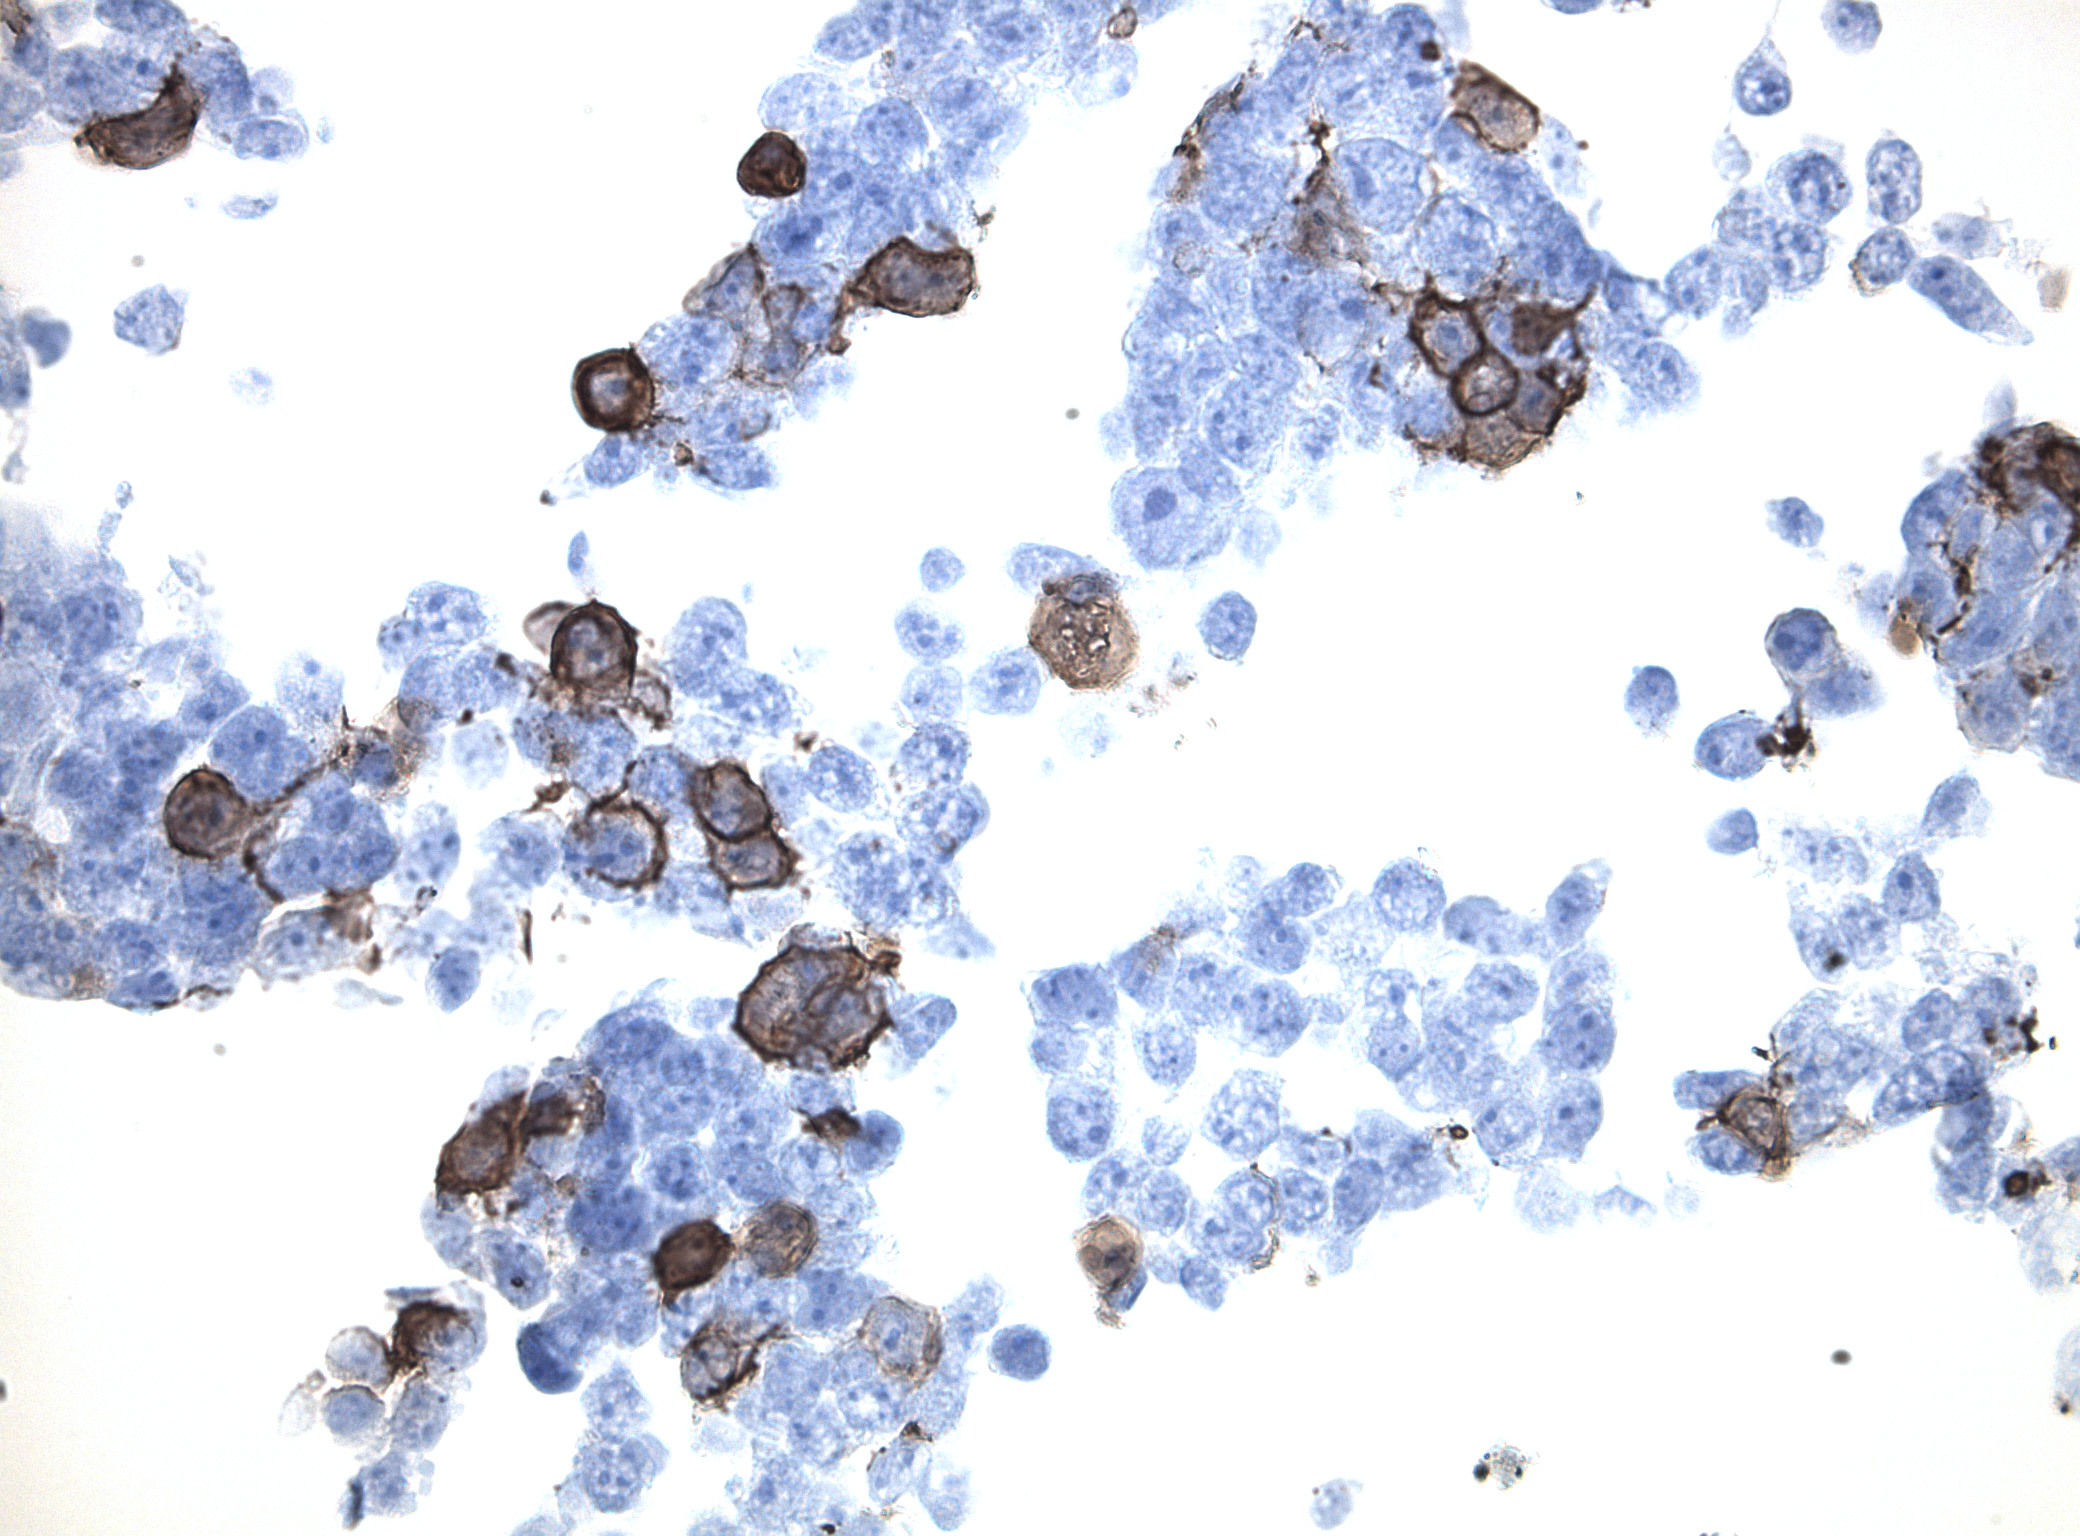 Immunohistology staining on CLDN22 overexpressed cytosection TS425263P5 with rabbit anti DDK clone OTIR5G2 C/N TA592569 at 1:2000 dilution 20m RT. Antibody staining was achieved with HIER Citrate pH6 , Polink1 with DAB chromogen detection kit (D11-18). Positive stain shown with the brown chromogen present. HEK293T cells were transfected with cDNA clone RC225263, 5 micron sections, 40x magnification